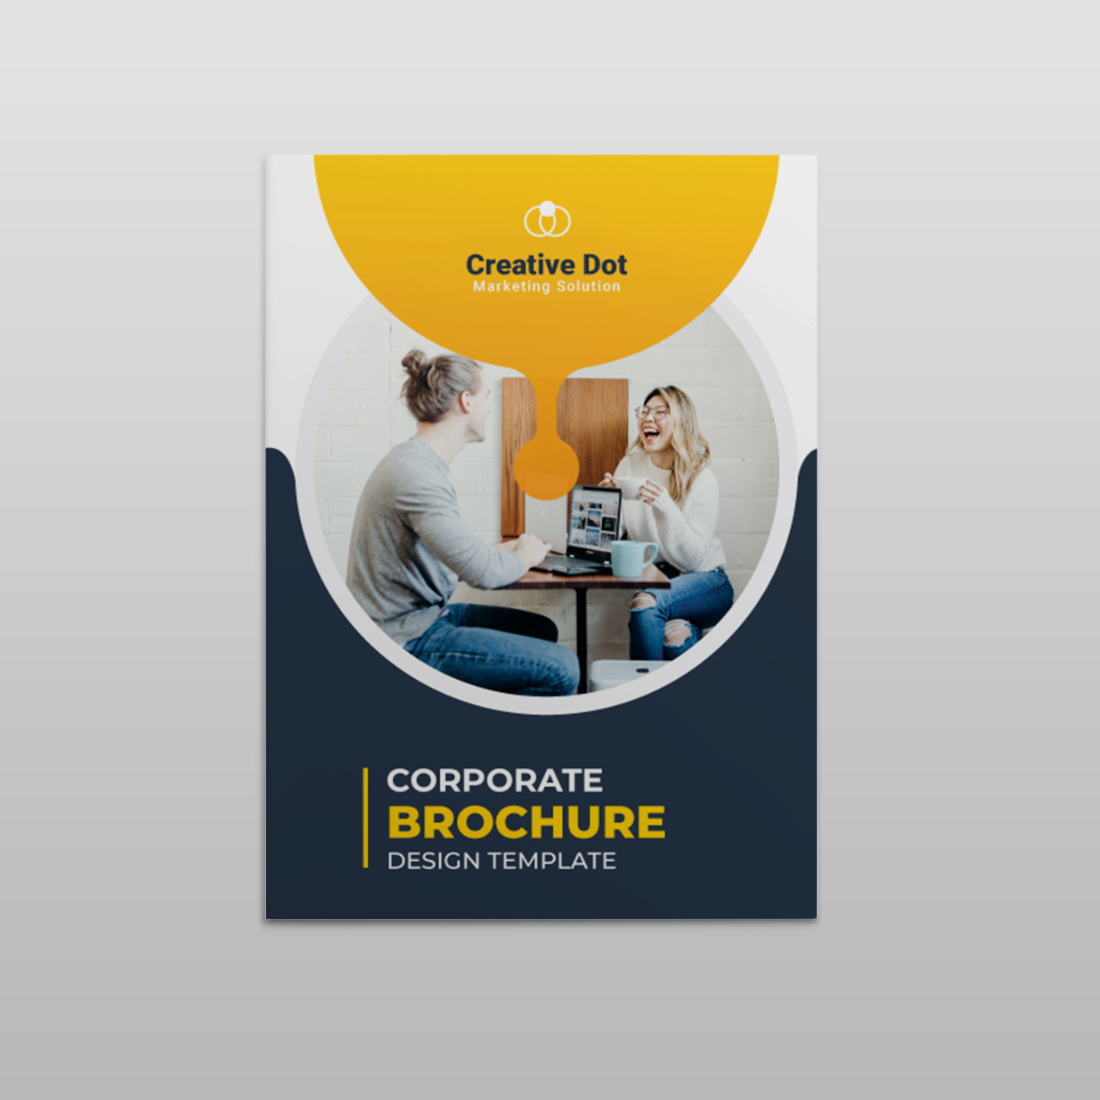 Stylish Corporate Brochure Template cover image.